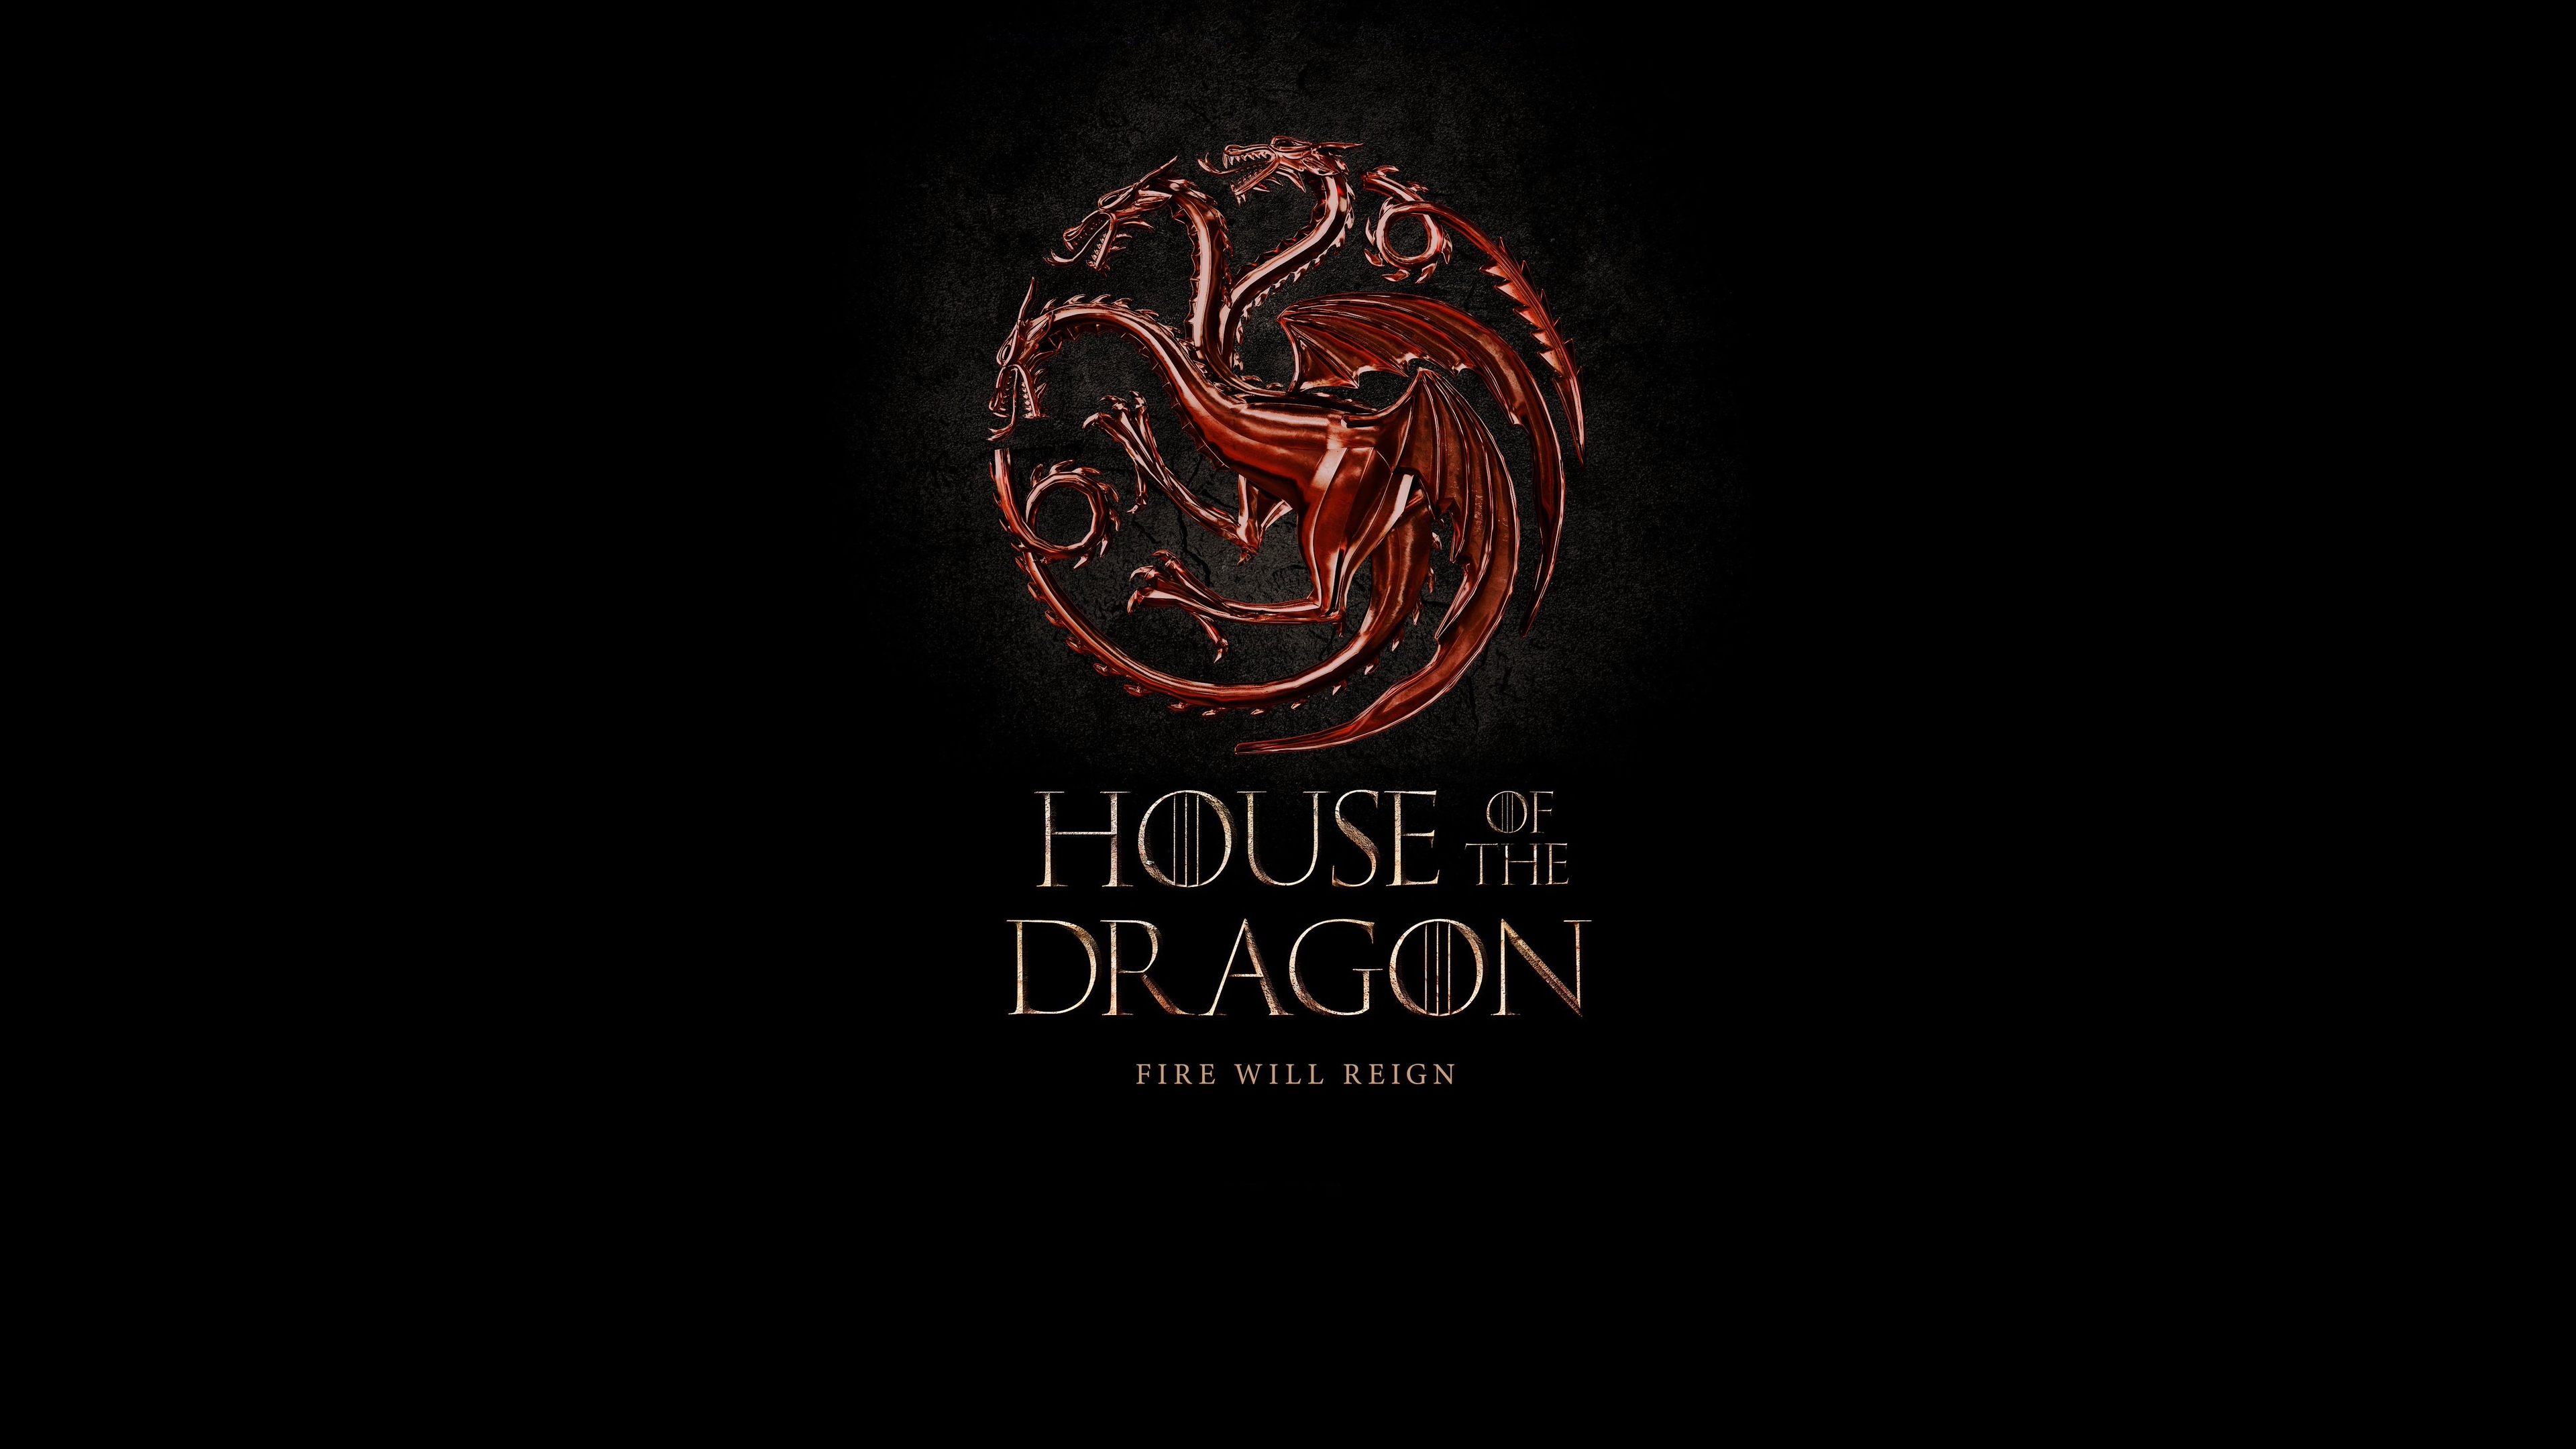 HD wallpaper, Hbo Series, 2022 Series, Black Background, Game Of Thrones, House Of The Dragon, Tv Series